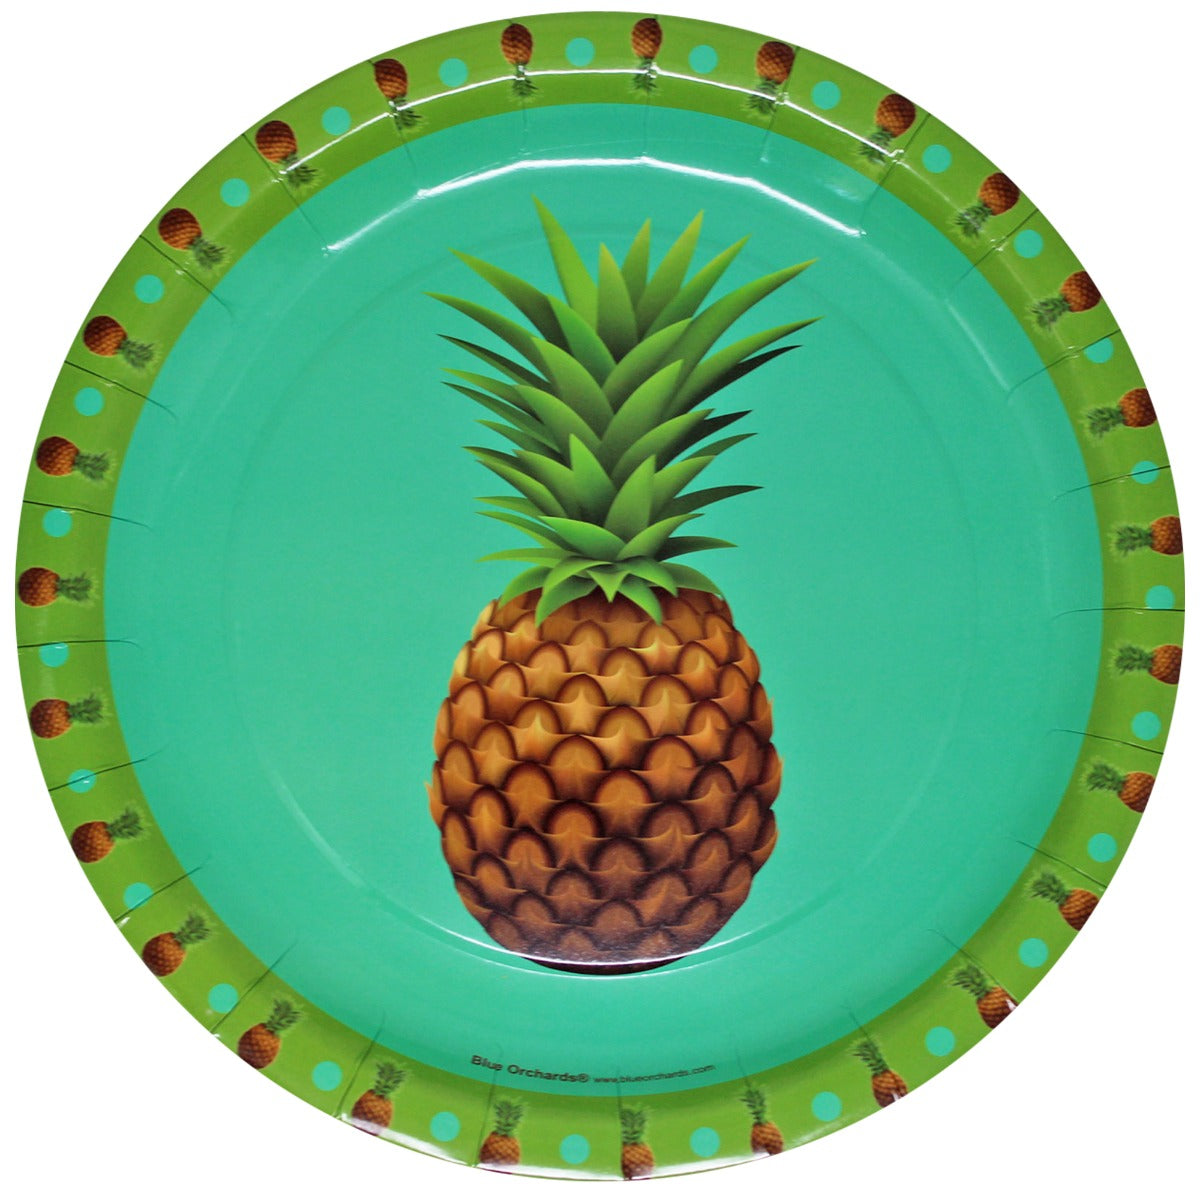 pineapple plates paper party
pineapple napkins and plates
pineapple themed party supplies
pineapple plate
pineapple decorations for party set
pineapple dessert plates
pineapple party supplies birthday
pineapple party decorations and supplies